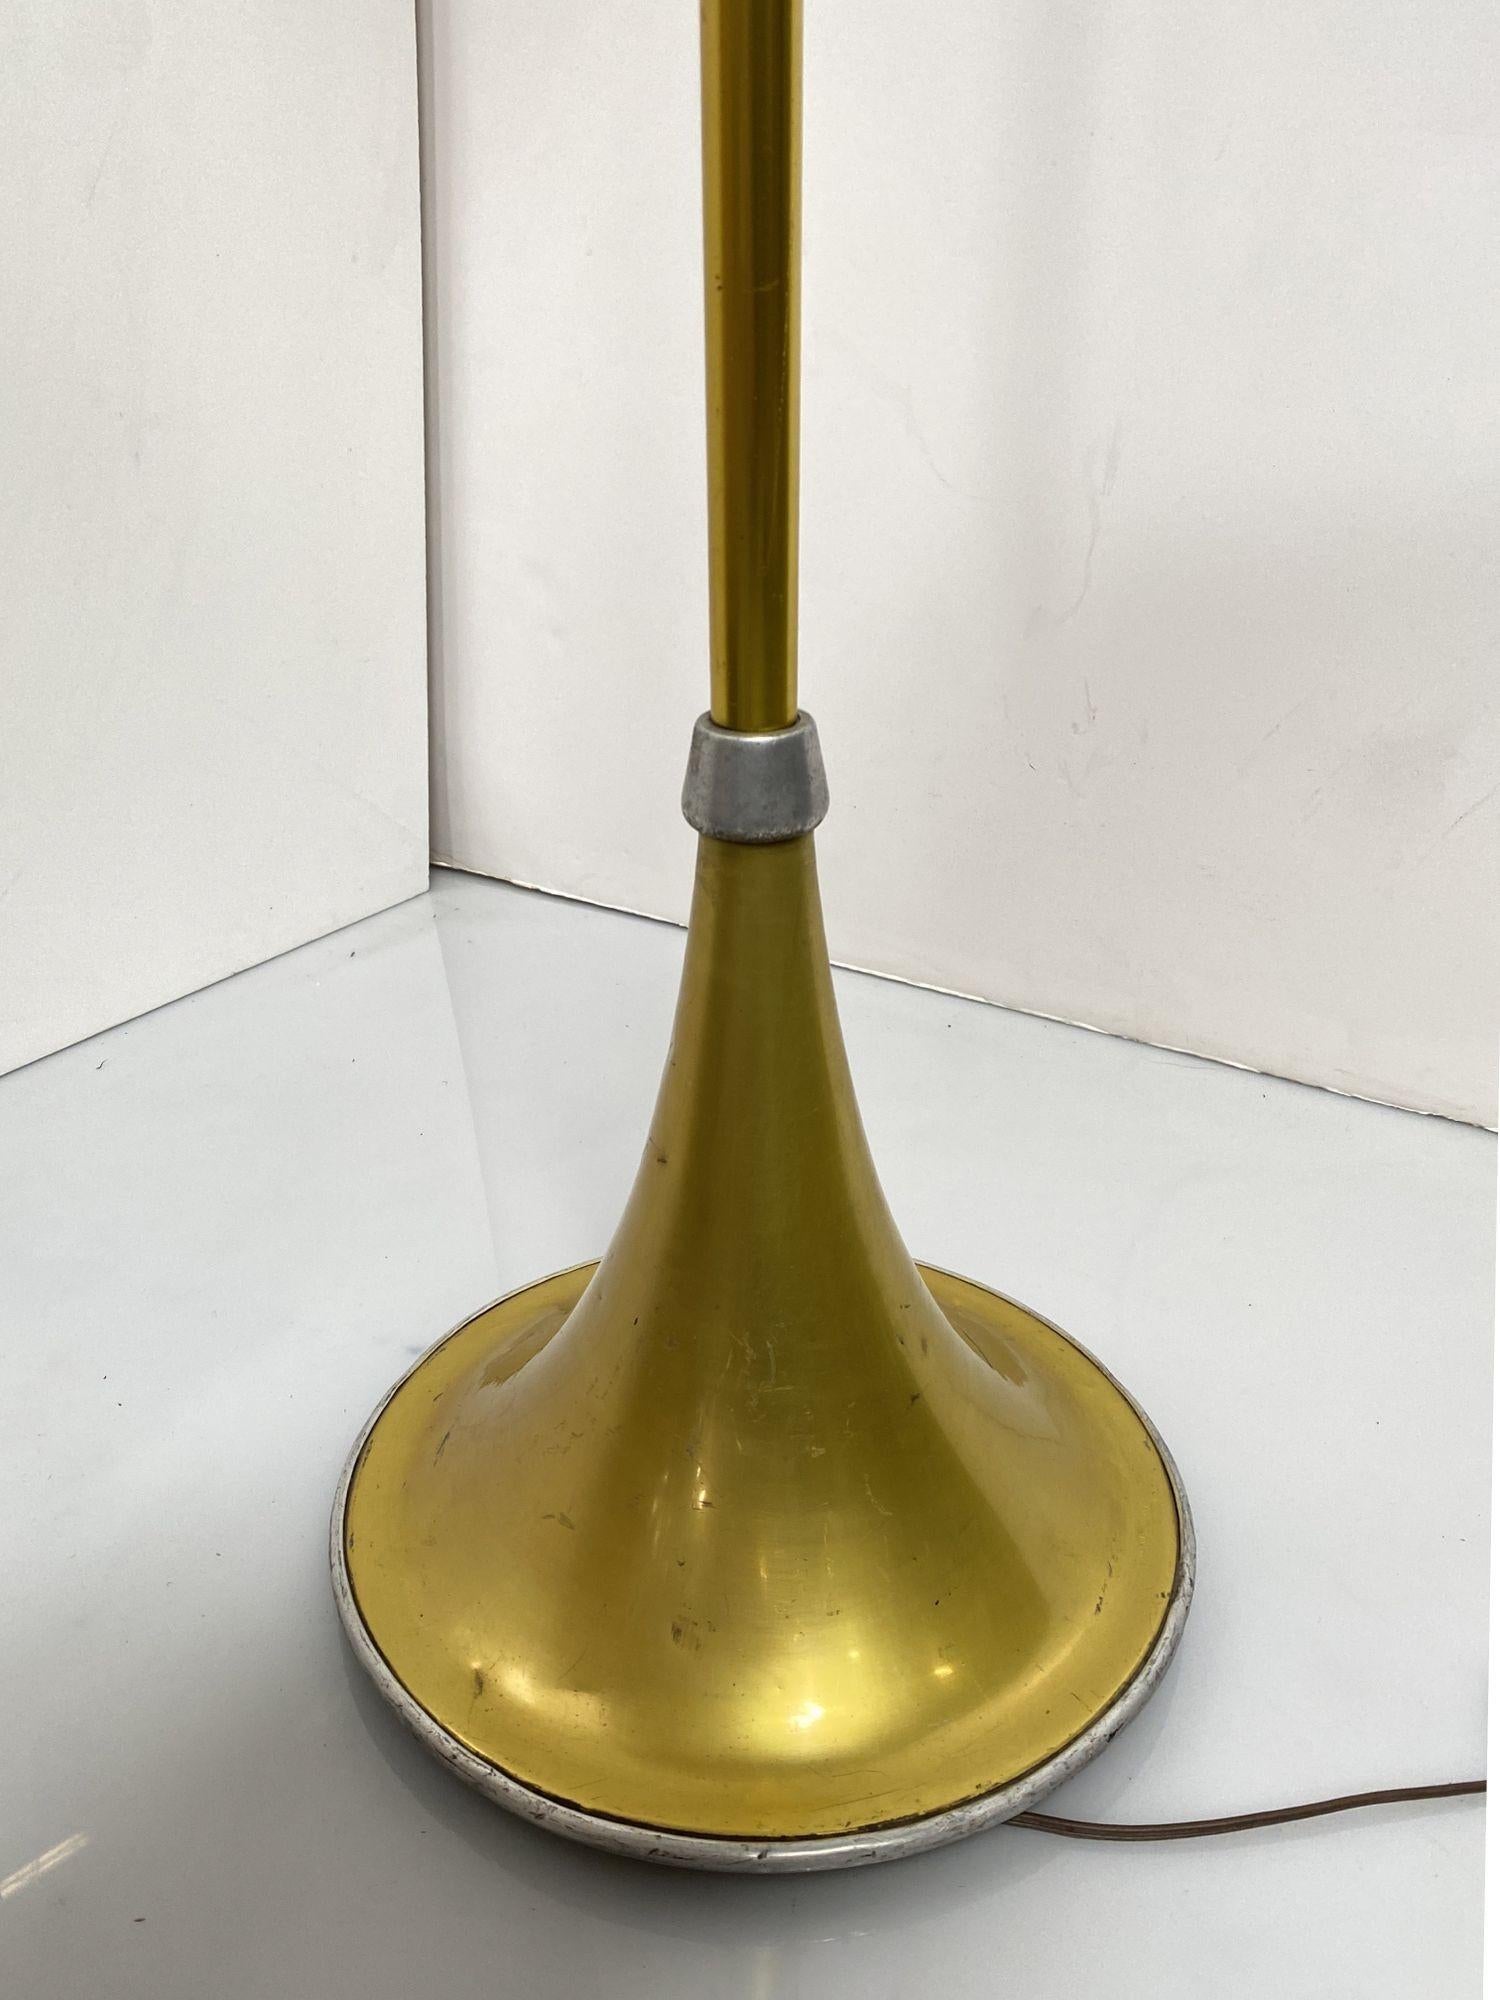 Art Deco Anodized Gold-Tone Spun Aluminum Torchiere Floor Lamp In Excellent Condition For Sale In Van Nuys, CA